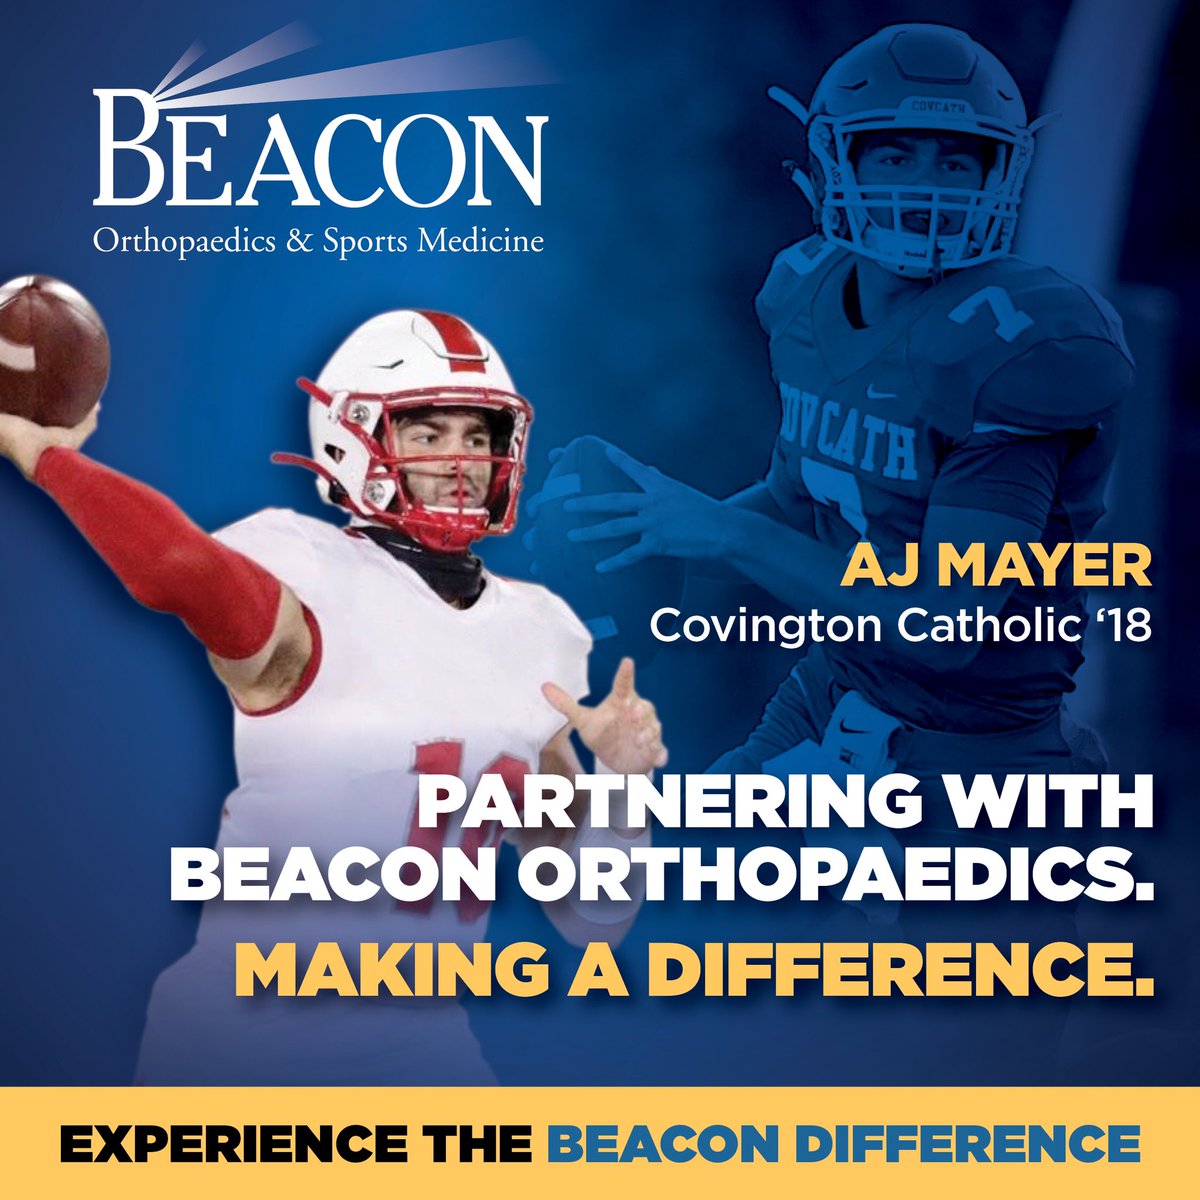 Excited to announce my new partnership with @BeaconOrtho!   Great to get to work with @MMayer1001 and represent NKY & Beacon who has treated my whole family. More to come! #BeaconDifference